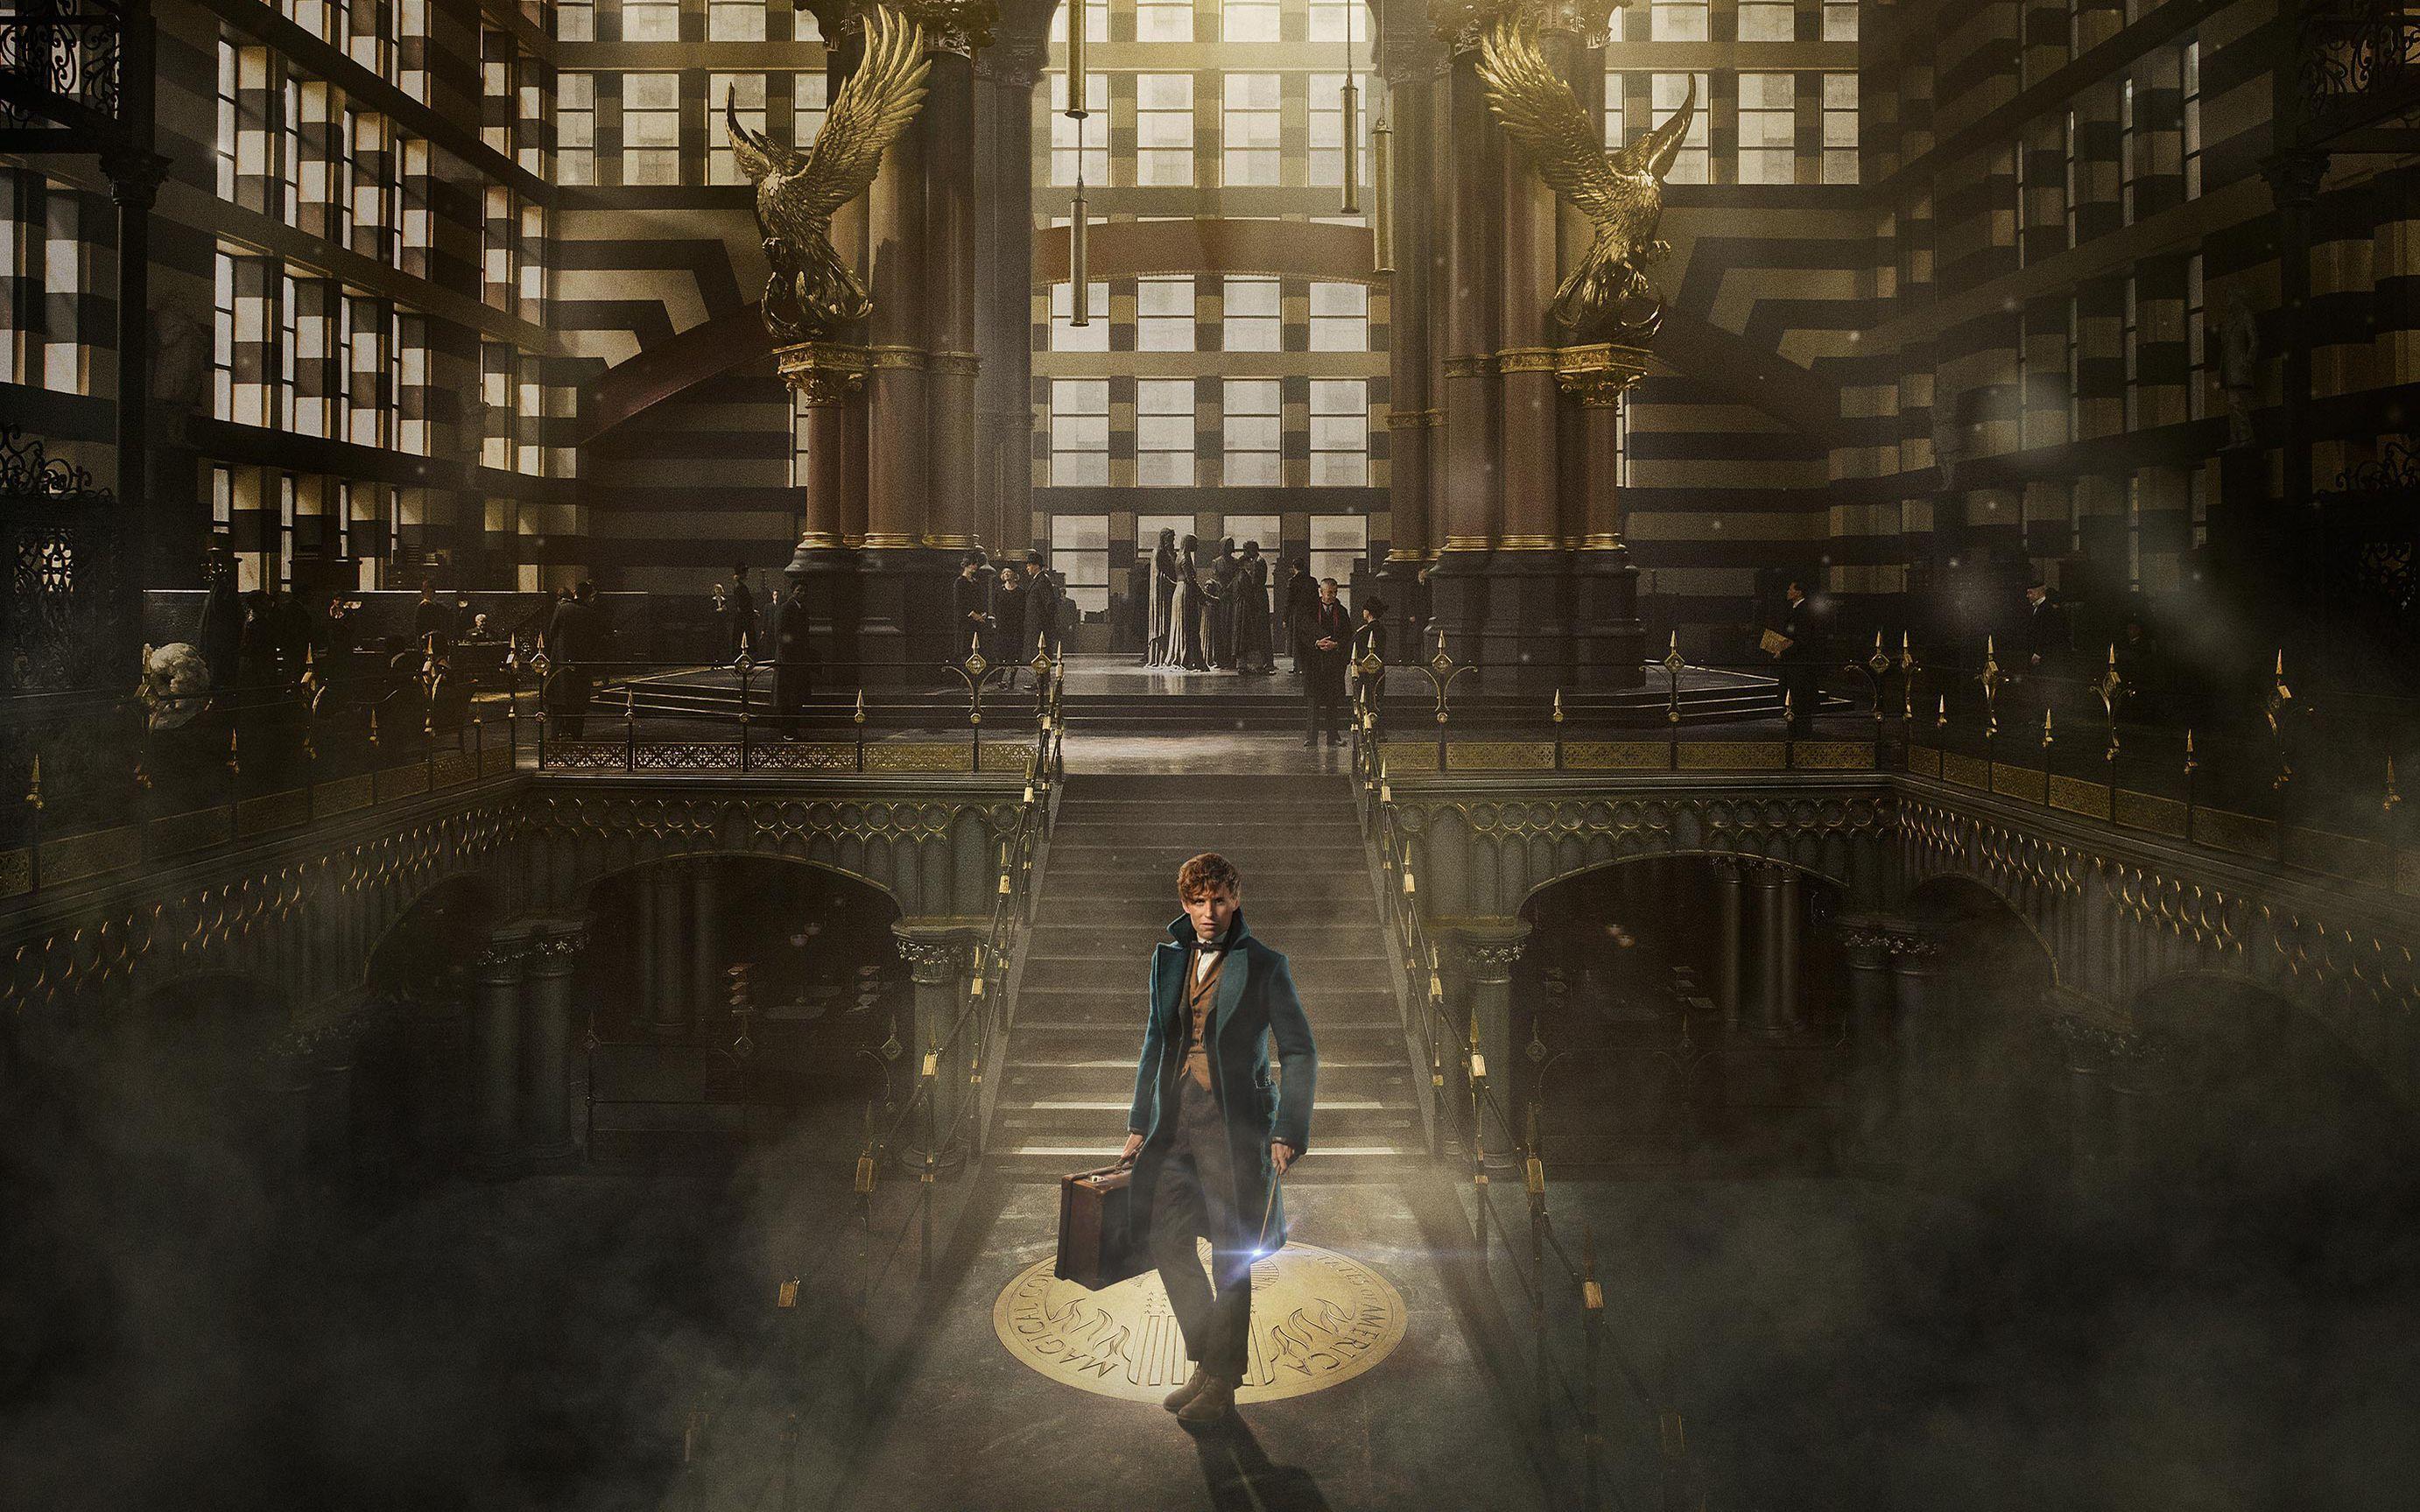 Fantastic Beasts and Where to Find Them HD Wallpaper